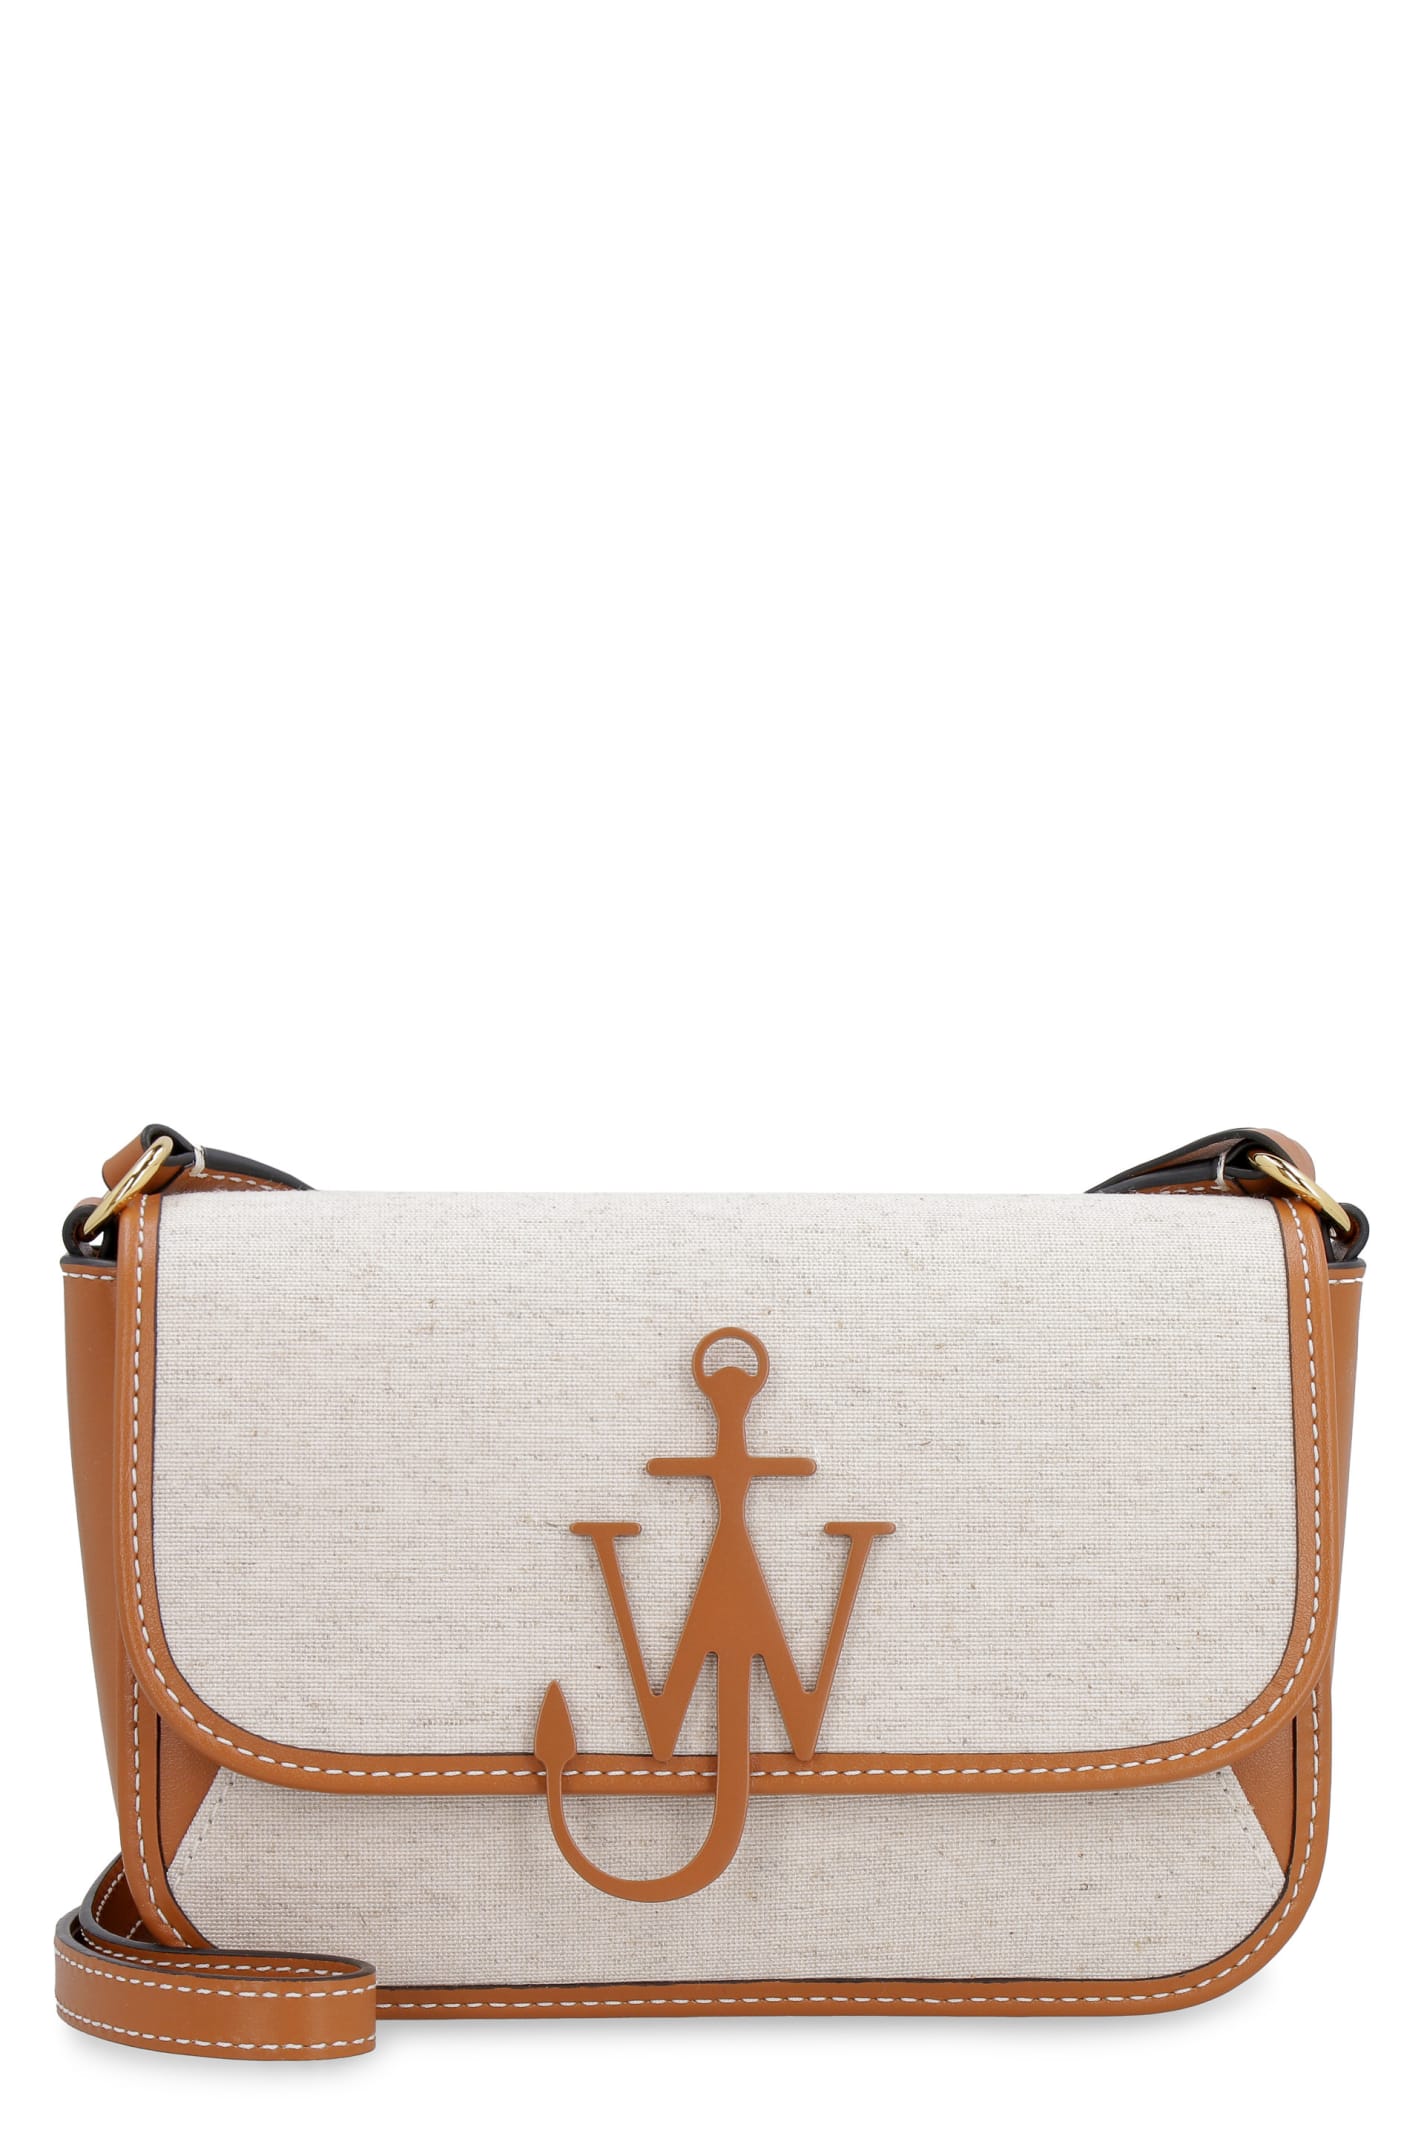 J.W. Anderson Braided Anchor Canvas And Leather Crossbody Bag